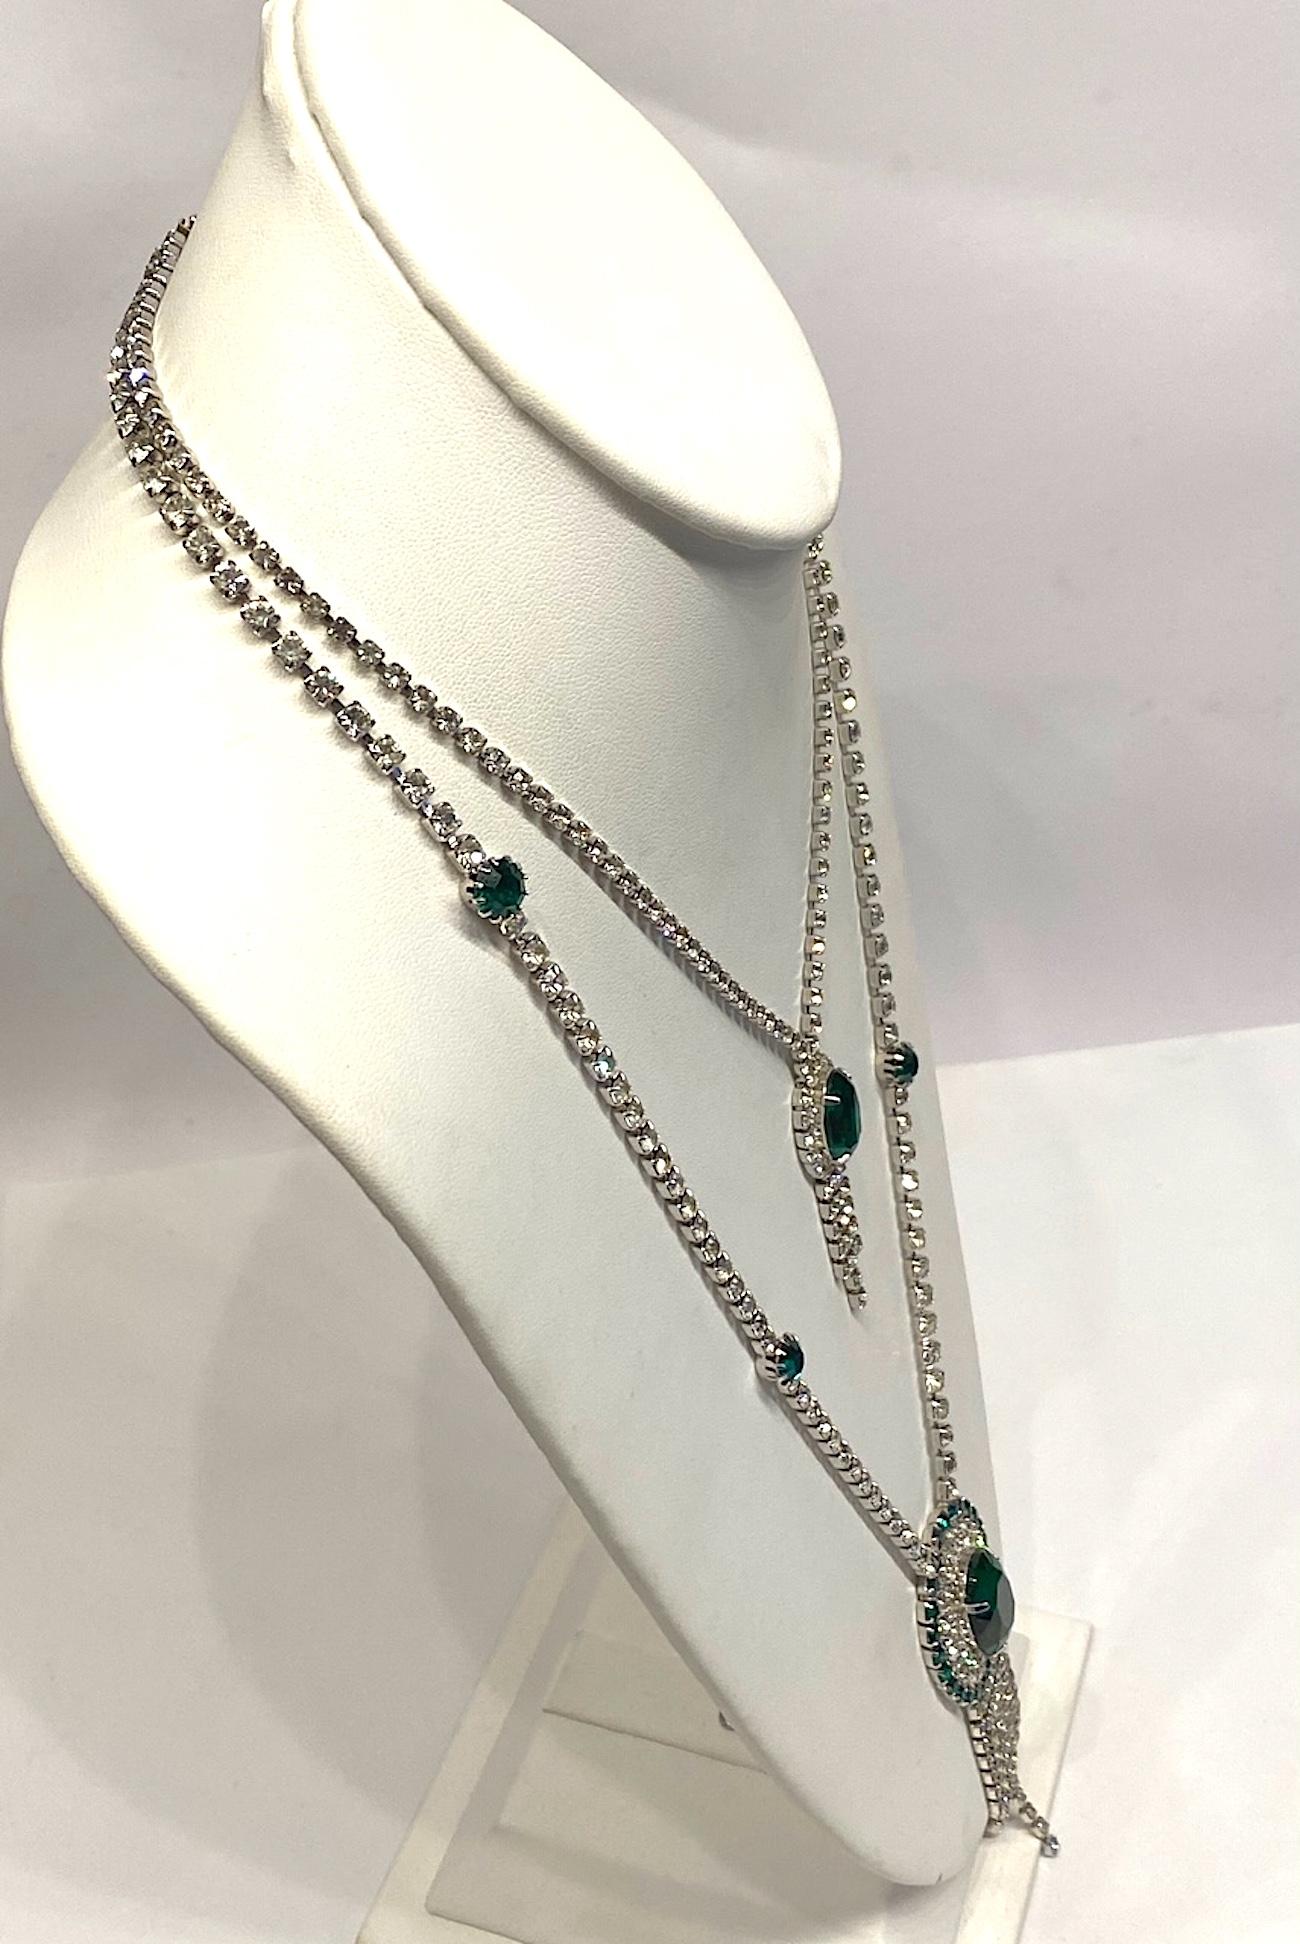 1950s / 1960s Emerald Green Crystal & Rhinestone Double Pendant Necklace 8